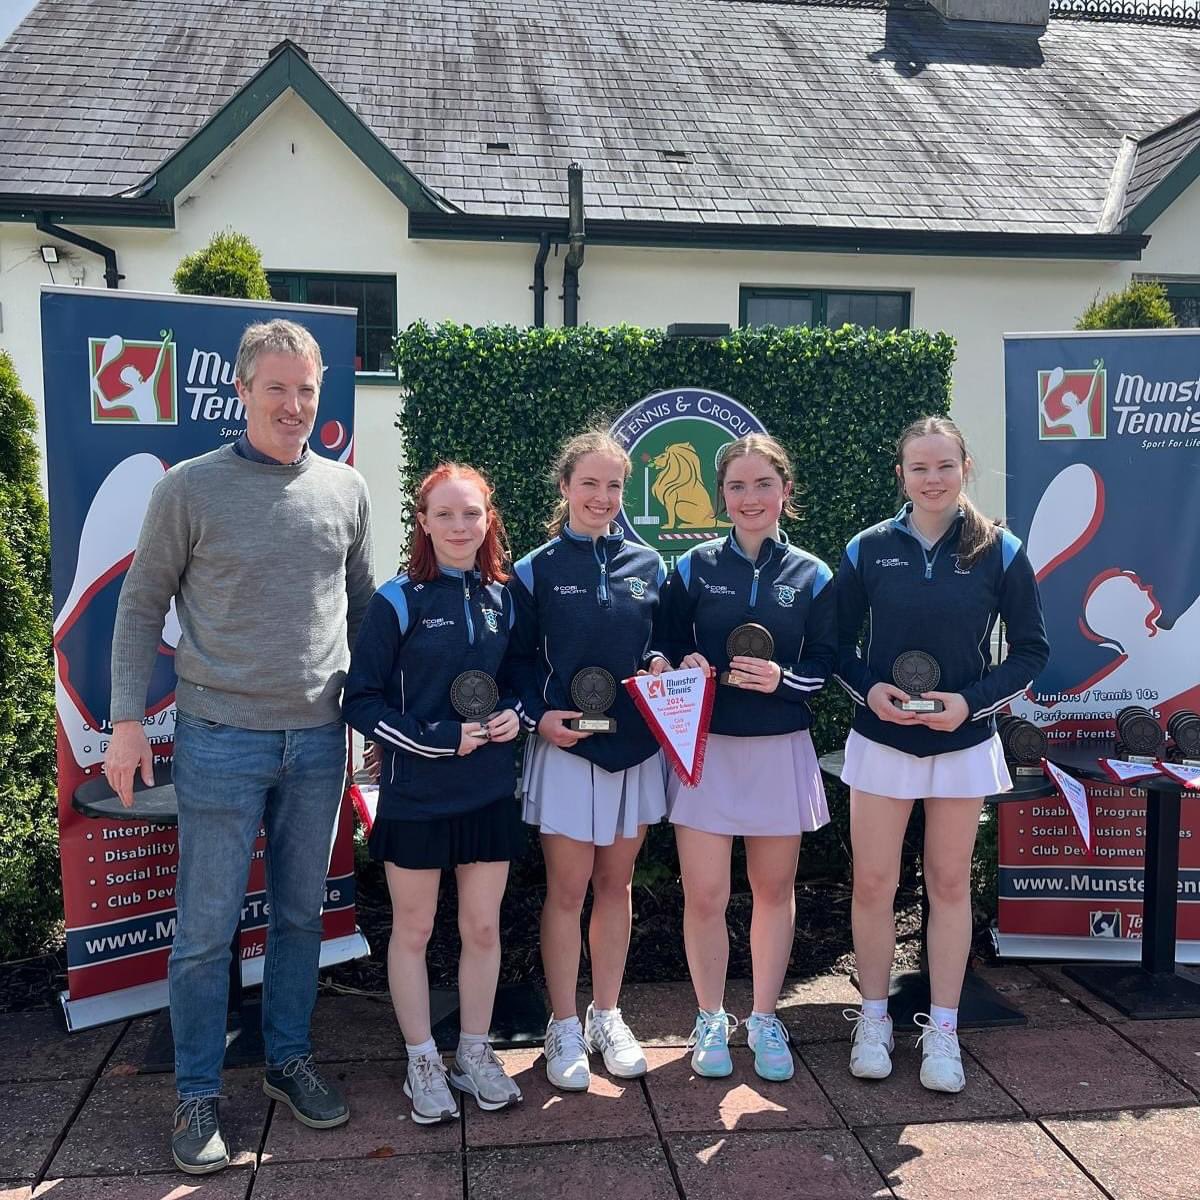 Huge congratulations to the U19 girls who won the Munster school’s final today in Rushbrooke 3-1 v St Angela’s Cork - a super achievement!! 🎾 #etbethos #community @LCETBSchools